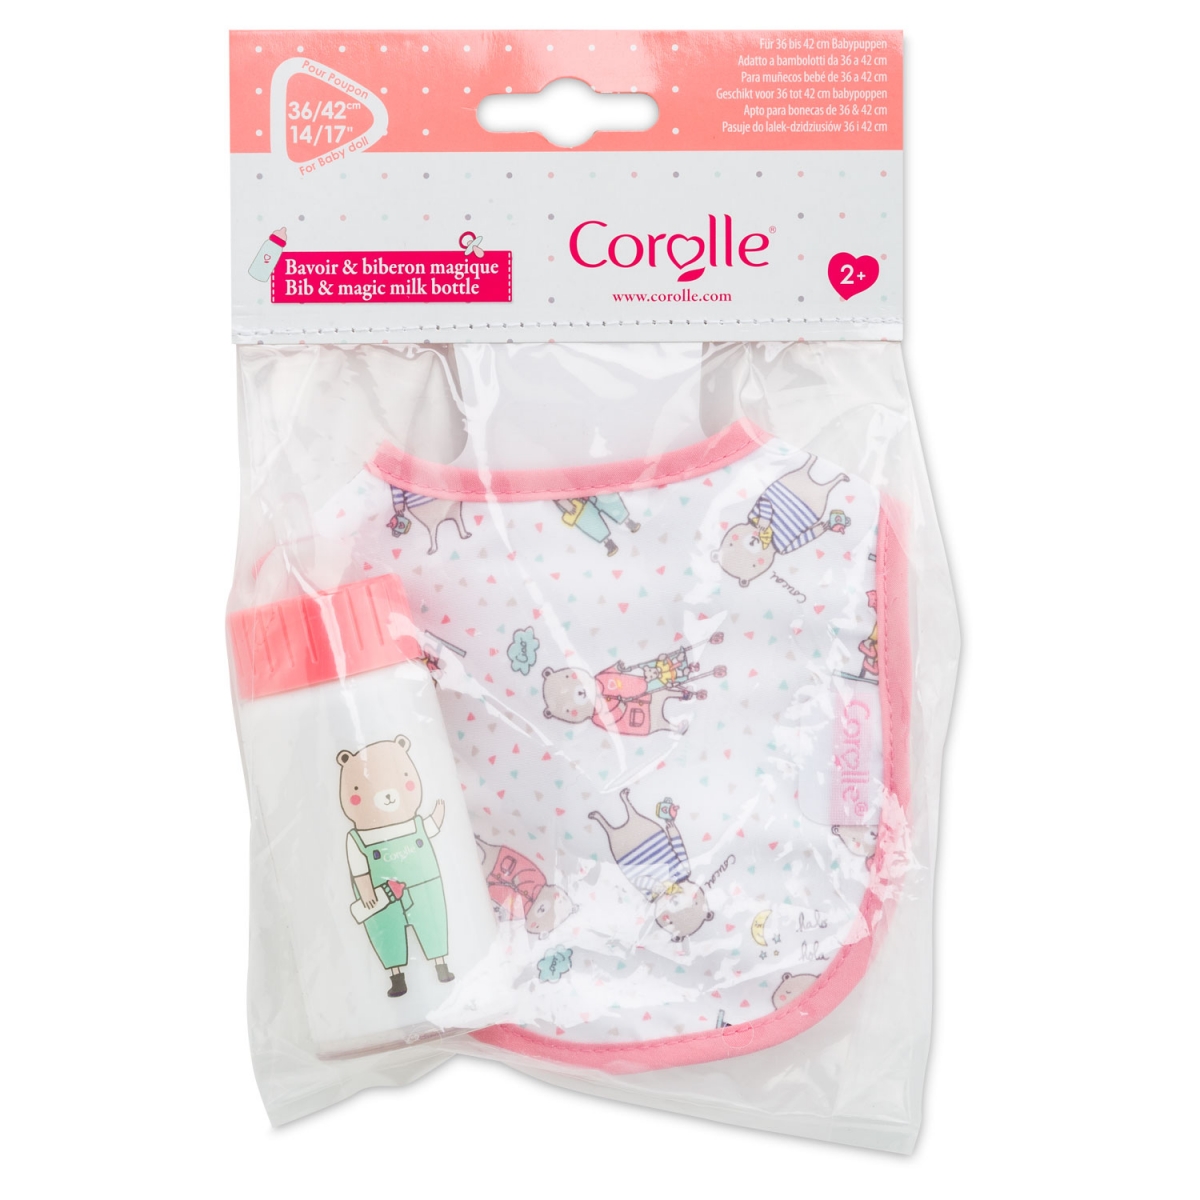 Corolle - , Bib and Magic Milk Bottle for 14 / 17 baby doll (9000140680)